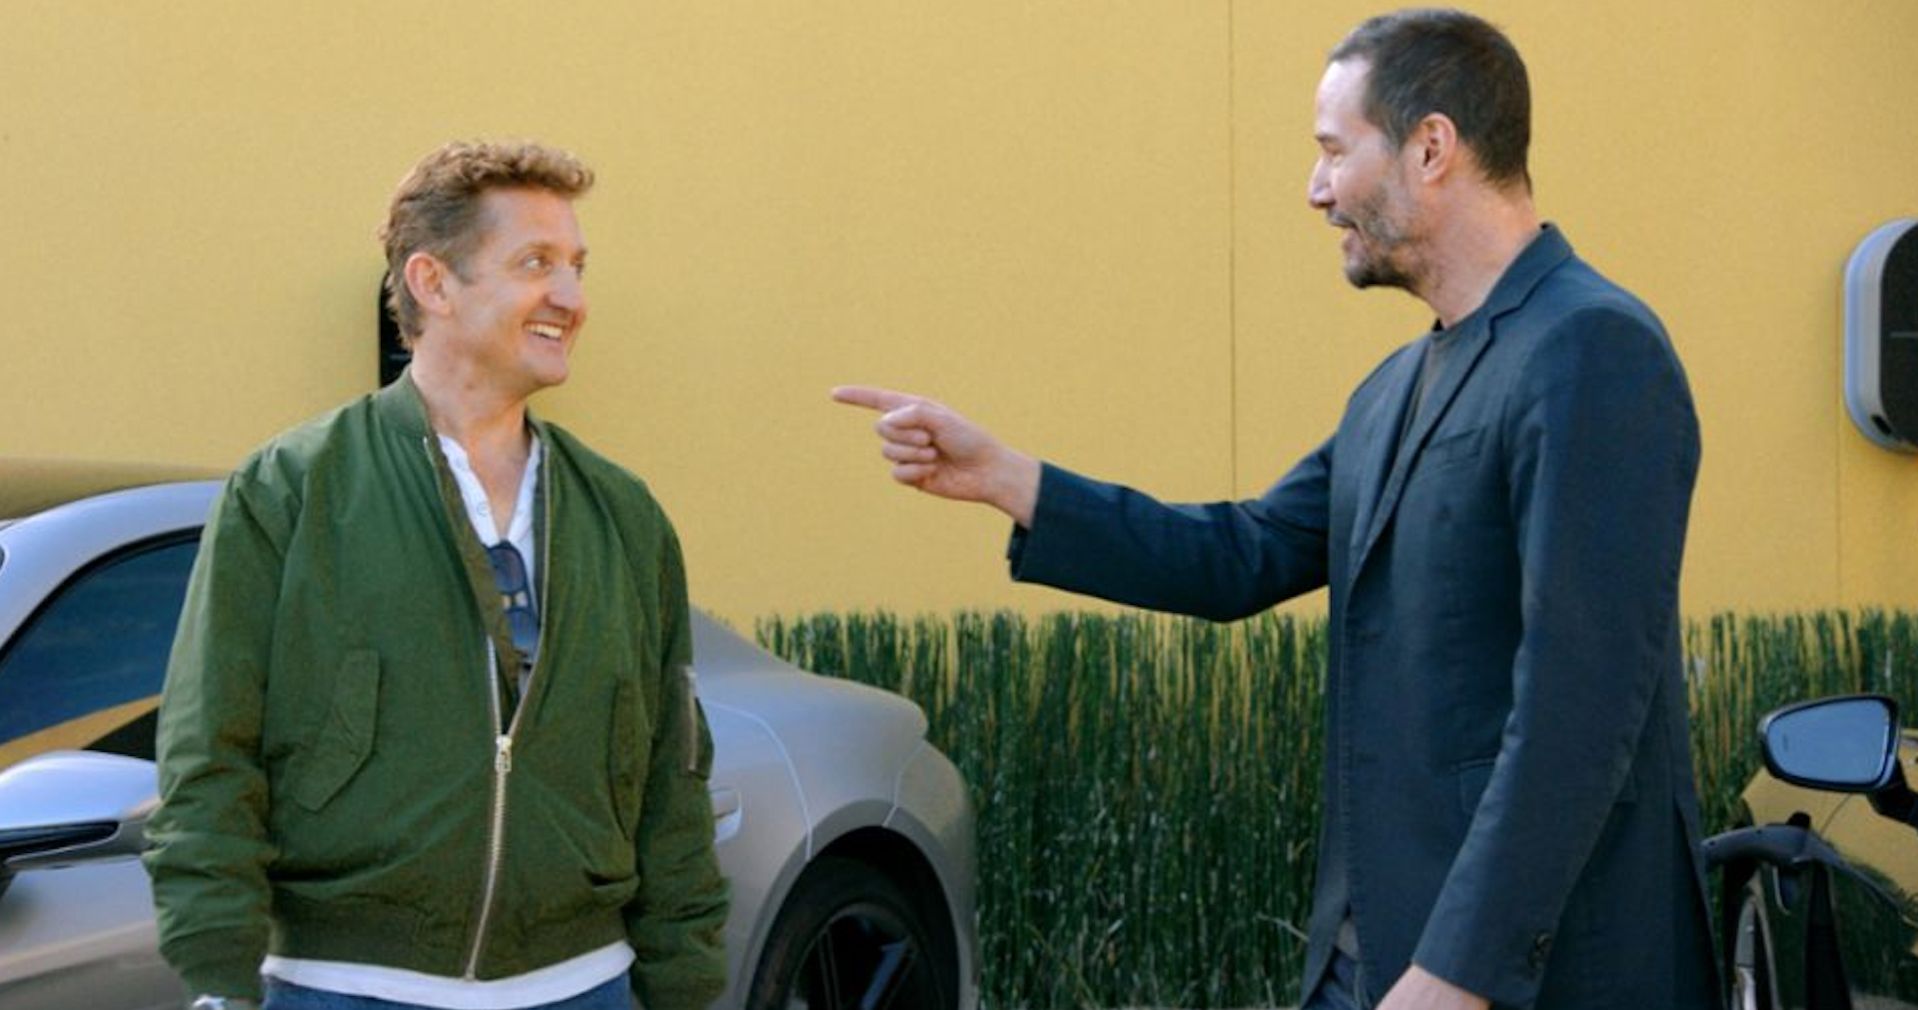 Bill &amp; Ted Stars Keanu Reeves and Alex Winter Reunite for the Porsche Taycan Turbo Challenge